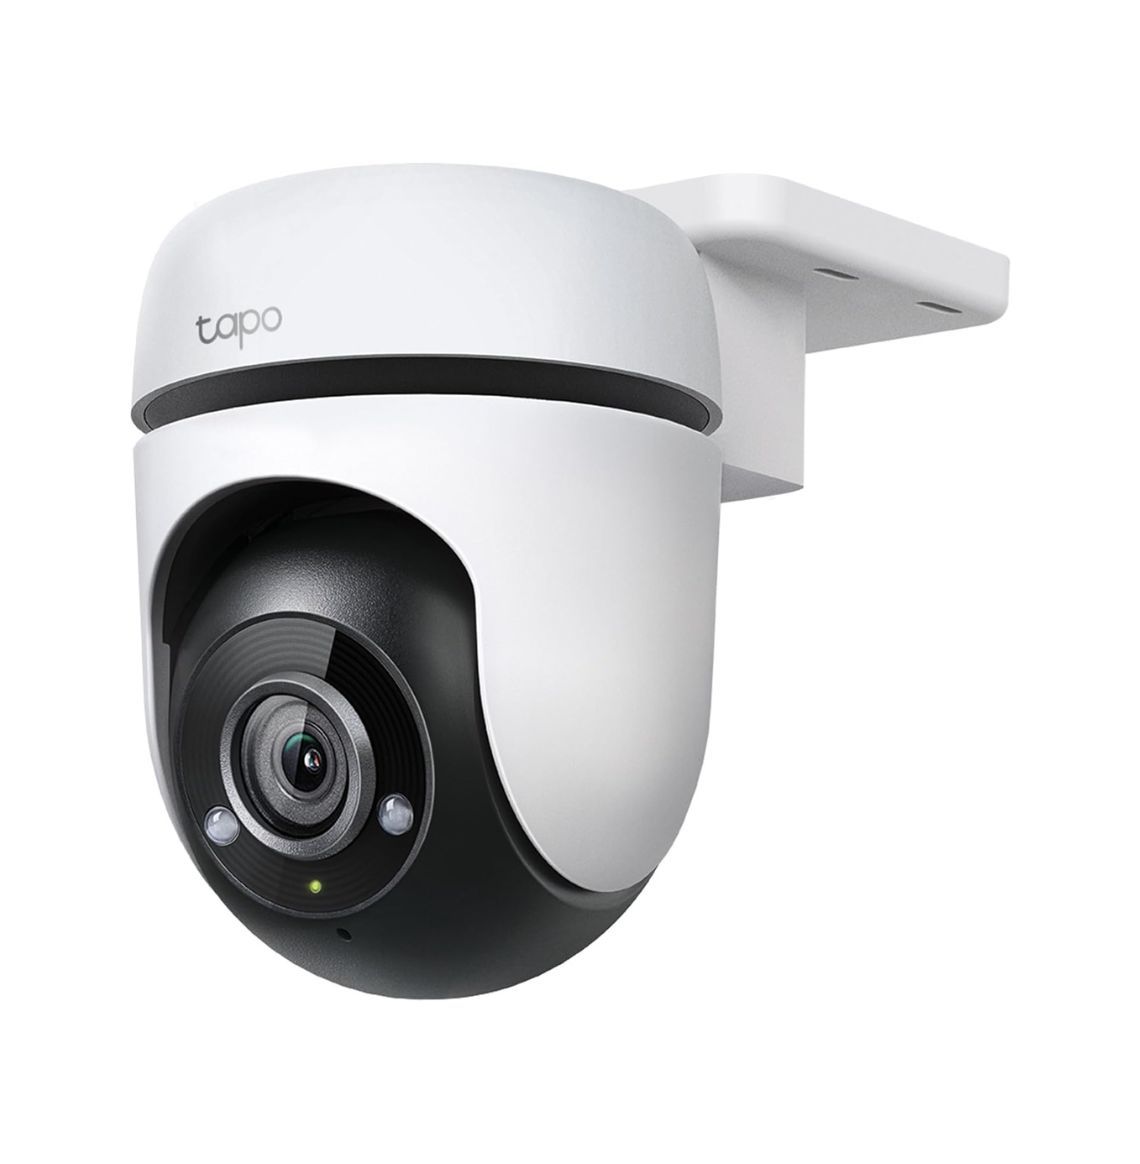 Tapo 1080P Outdoor Wired Pan/Tilt Security Wi-Fi Camera